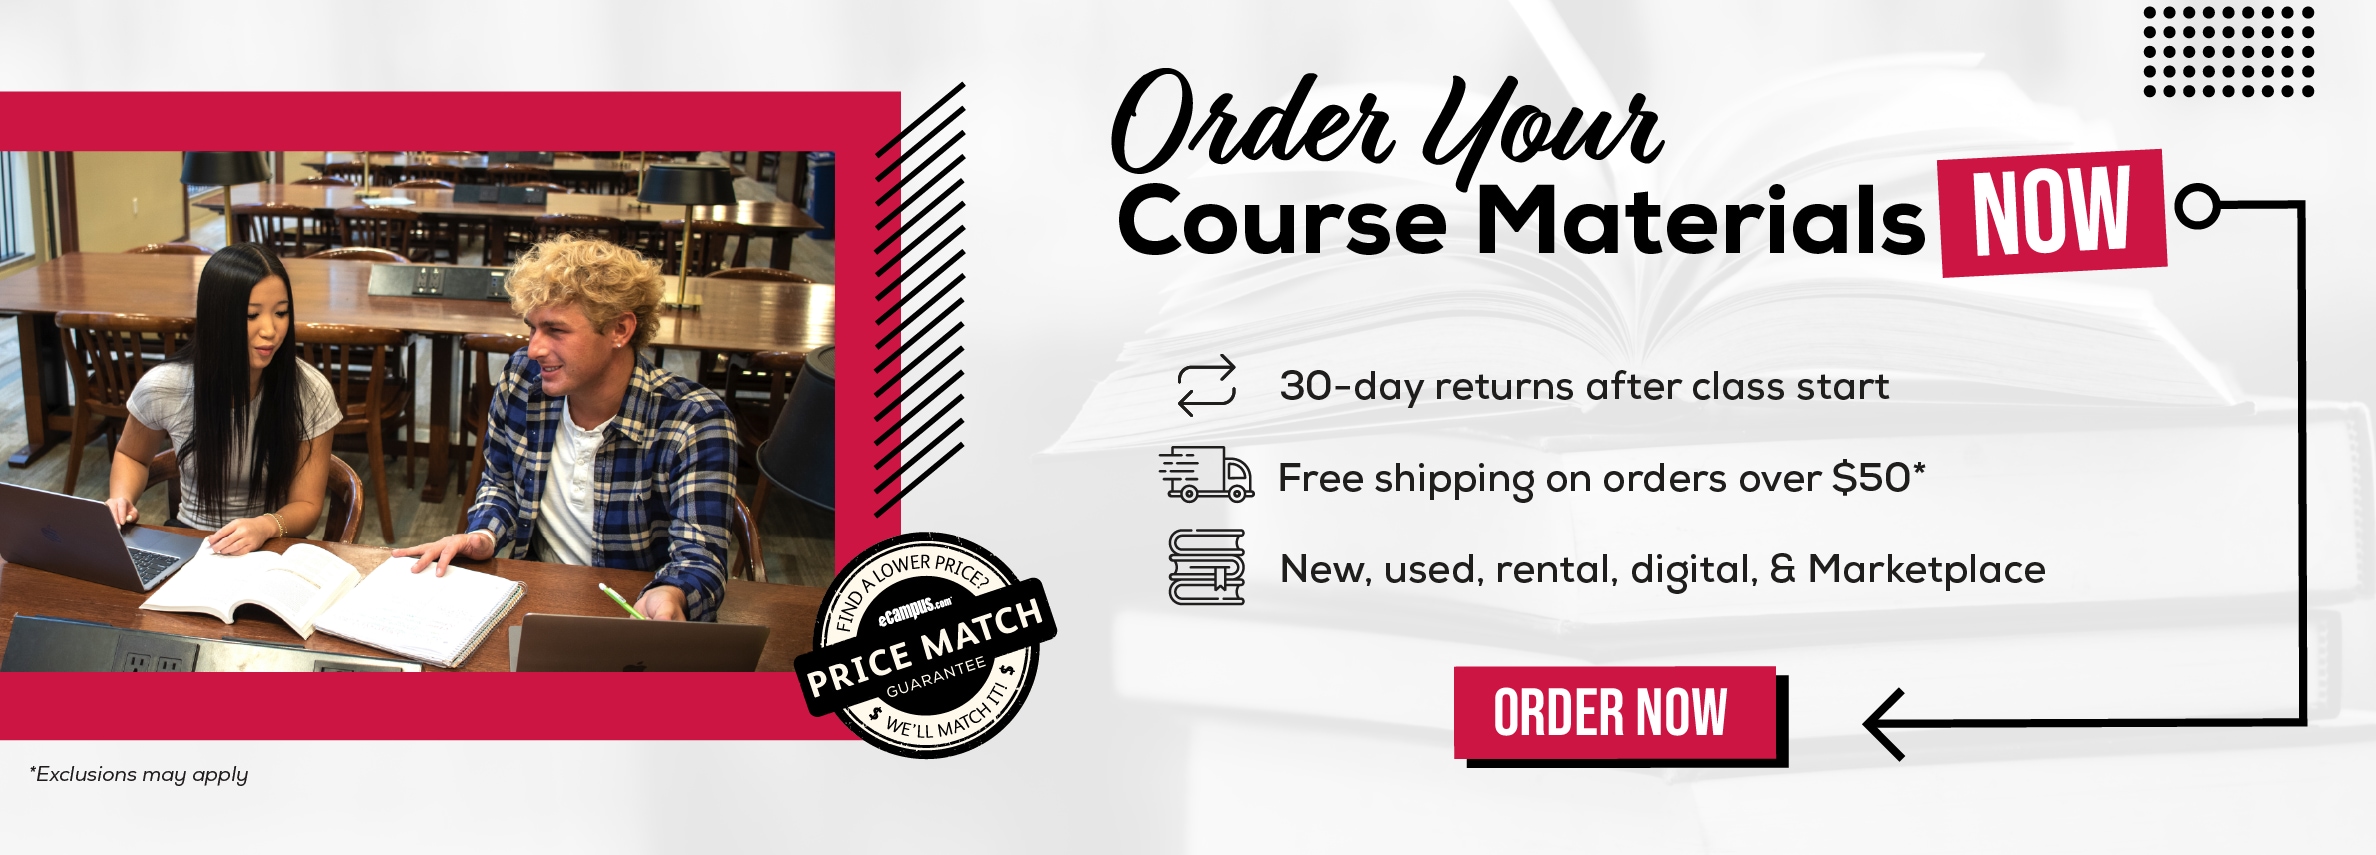 Order Your Course Materials Now. 30-day returns after class start. Free shipping on orders over $50*. New, used, rental, digital, & Marketplace. Order now. *Exclusions may apply.